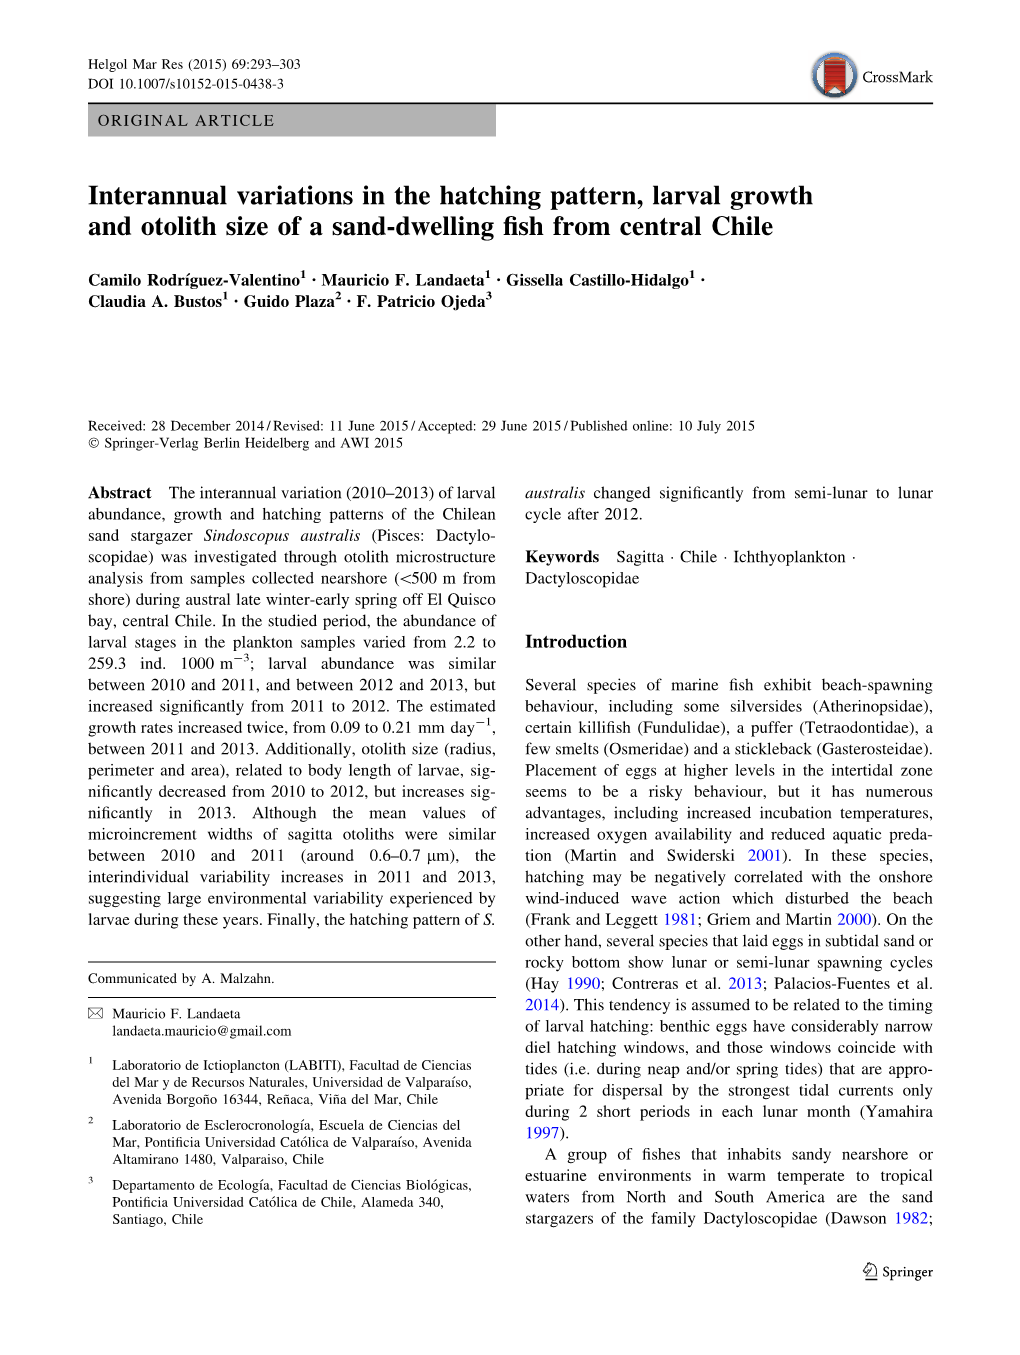 Interannual Variations in the Hatching Pattern, Larval Growth and Otolith Size of a Sand-Dwelling ﬁsh from Central Chile